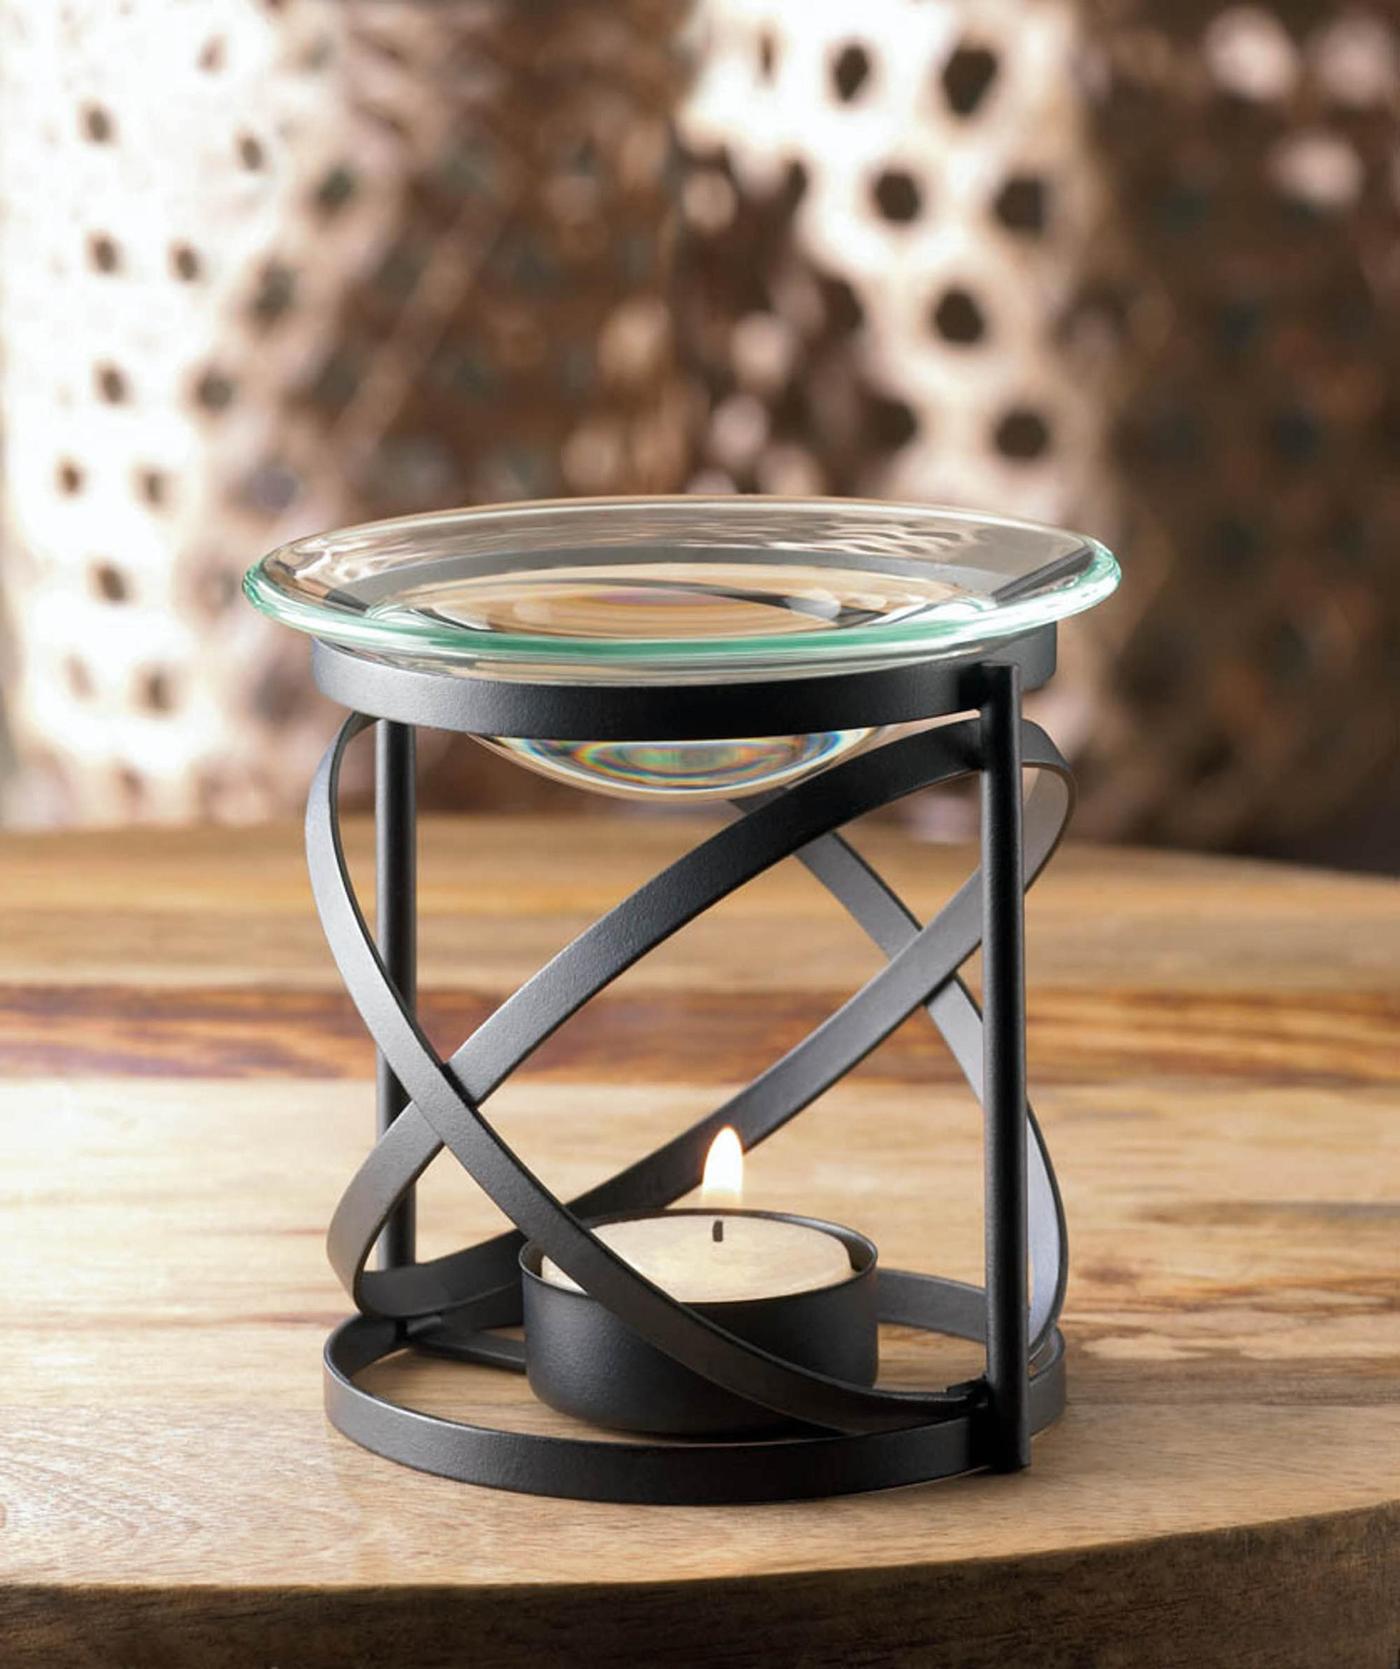 Black Metal and glass Orbital Oil Warmer by Fragrance Foundry